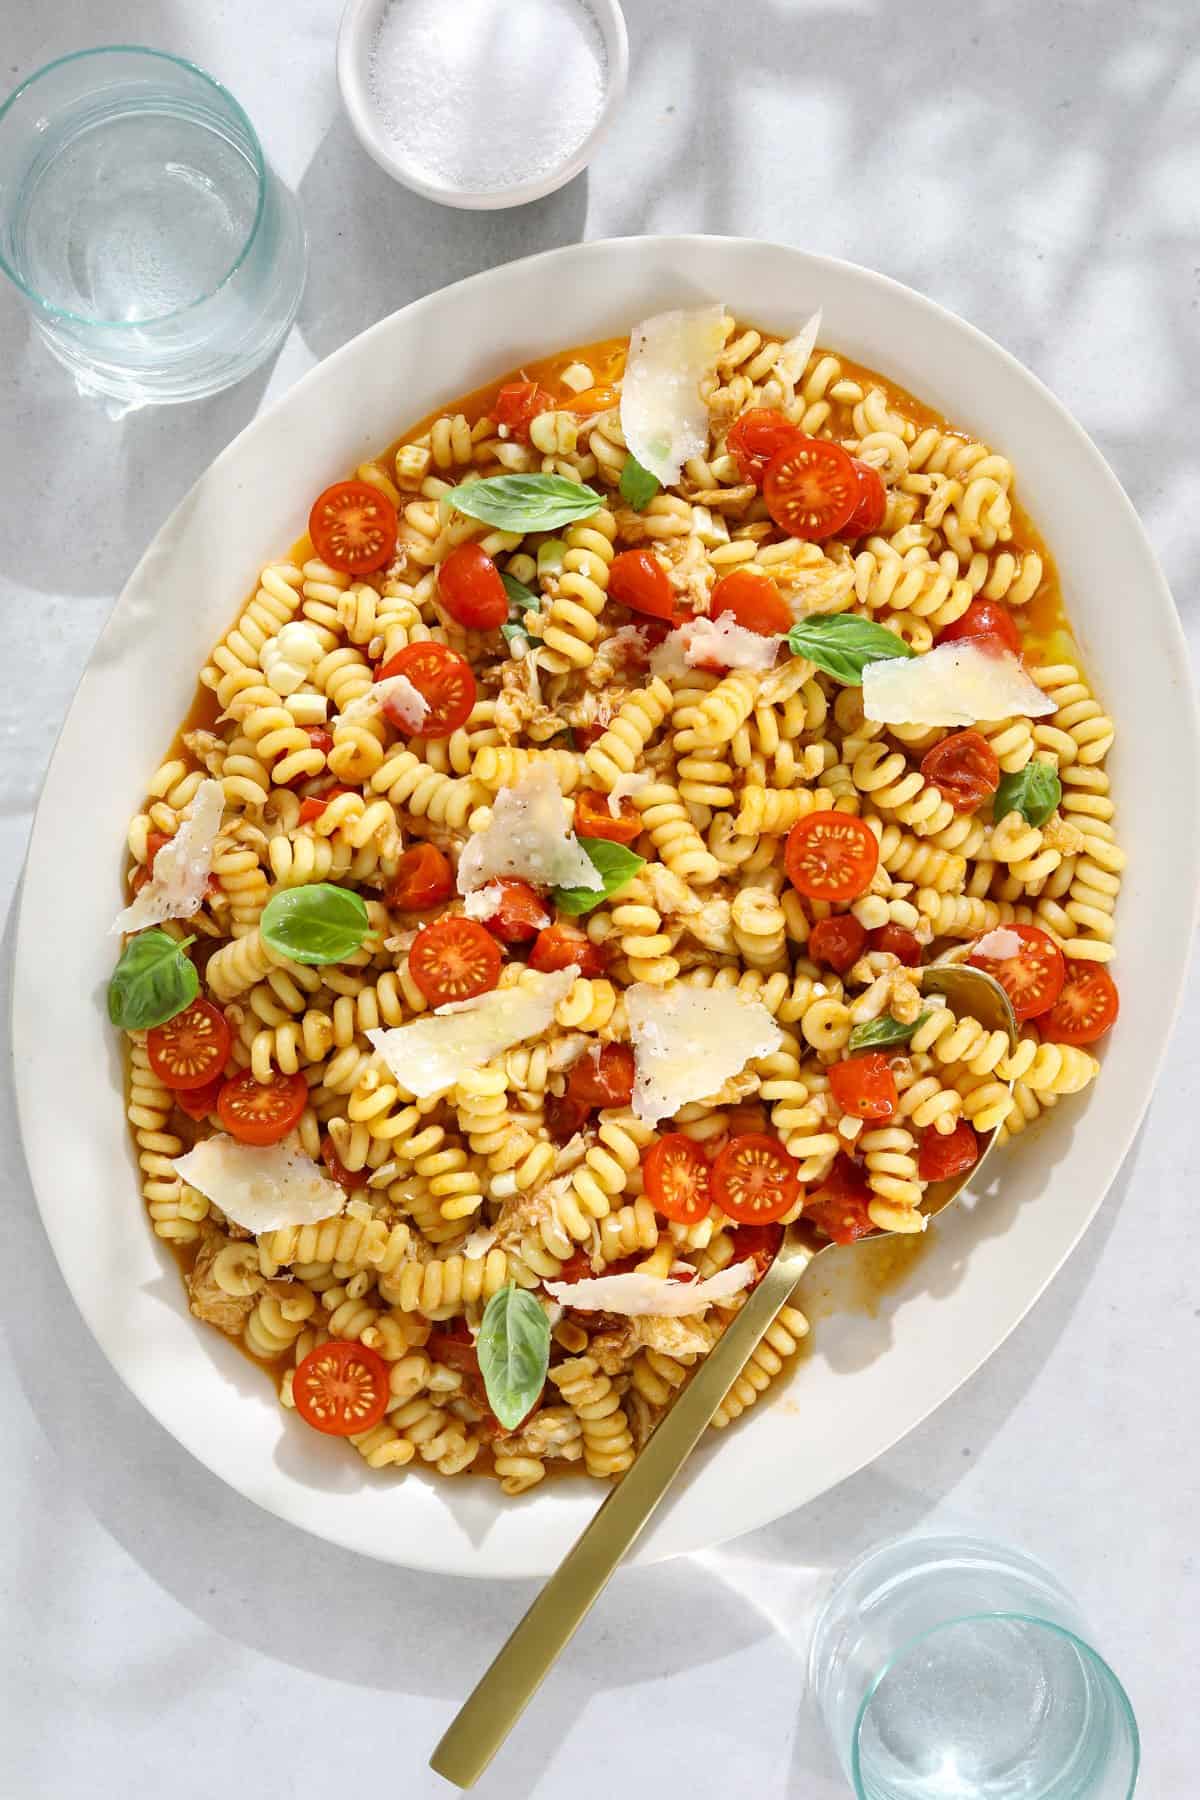 A large oval platter filled with pasta, cherry tomatoes, shaved parmesan cheese and fresh basil.